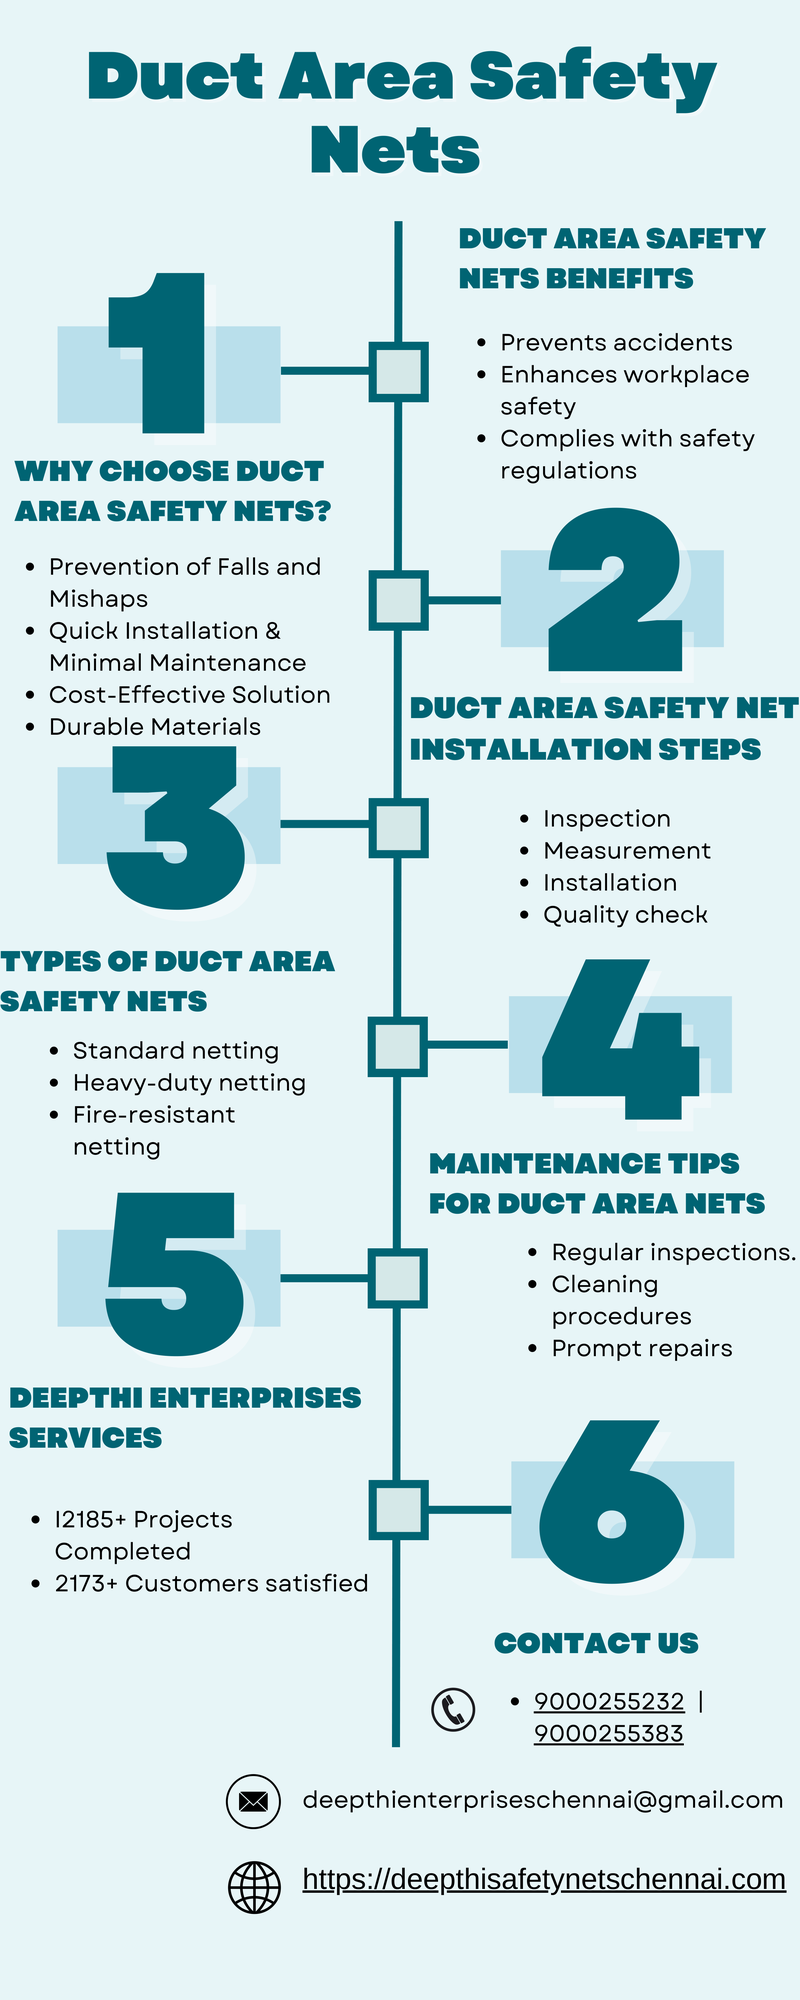 Duct Area Safety Nets Benefits